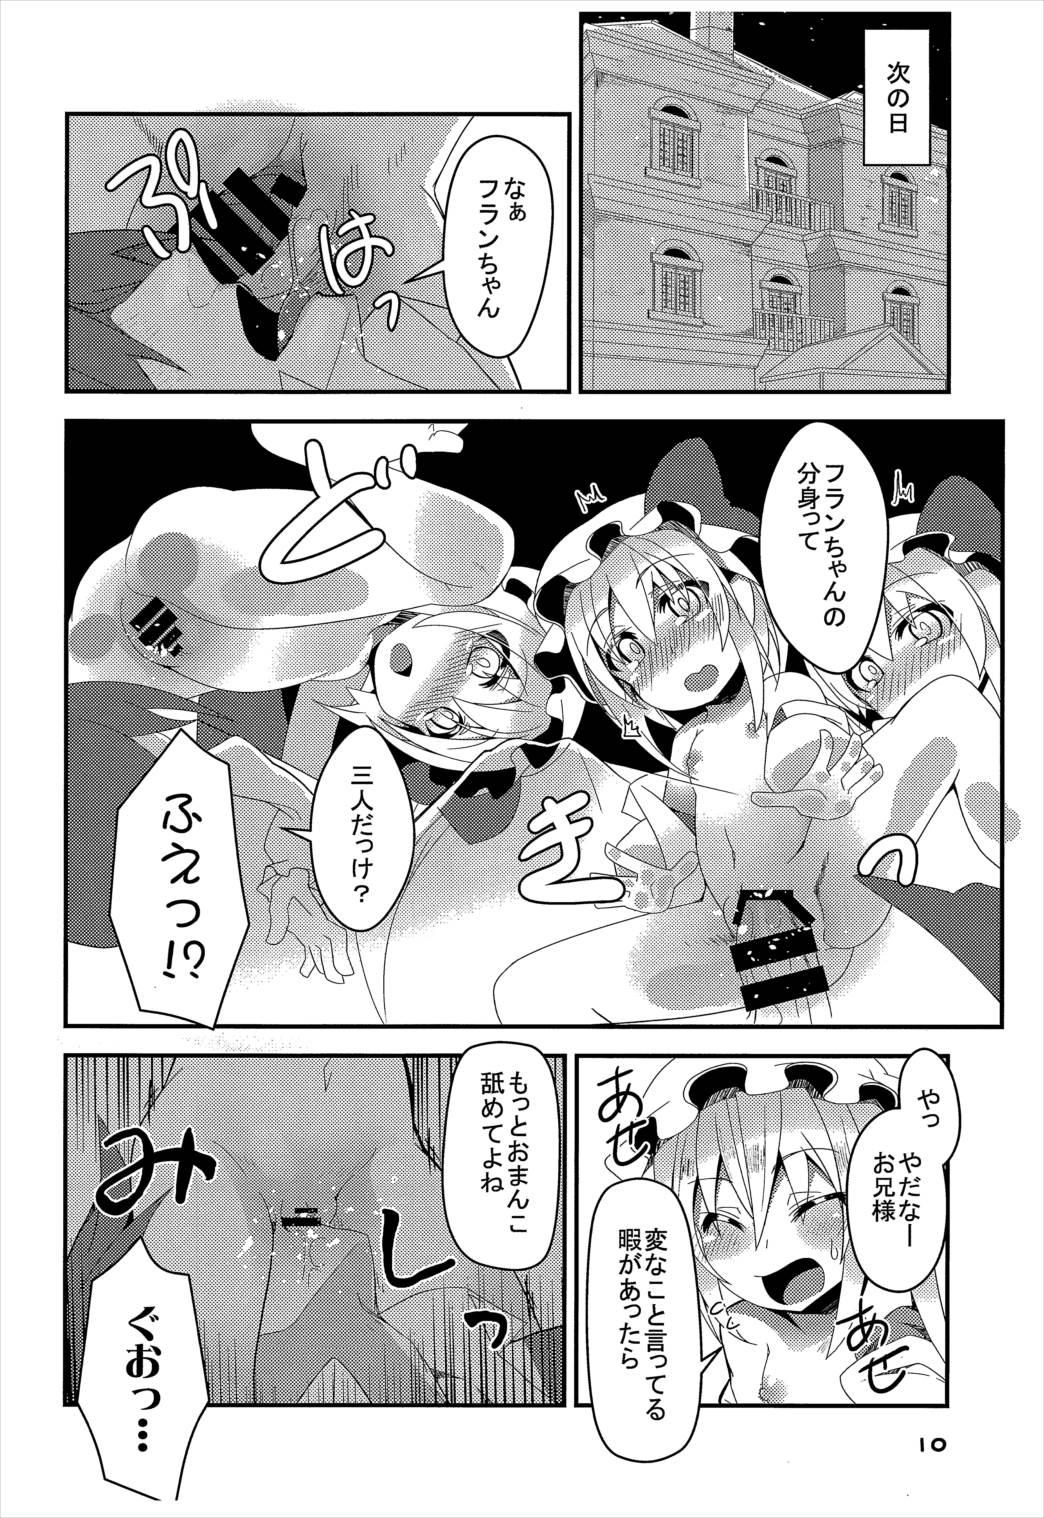 Point Of View Four of Flan-chan no Gyakushuu - Touhou project Atm - Page 9